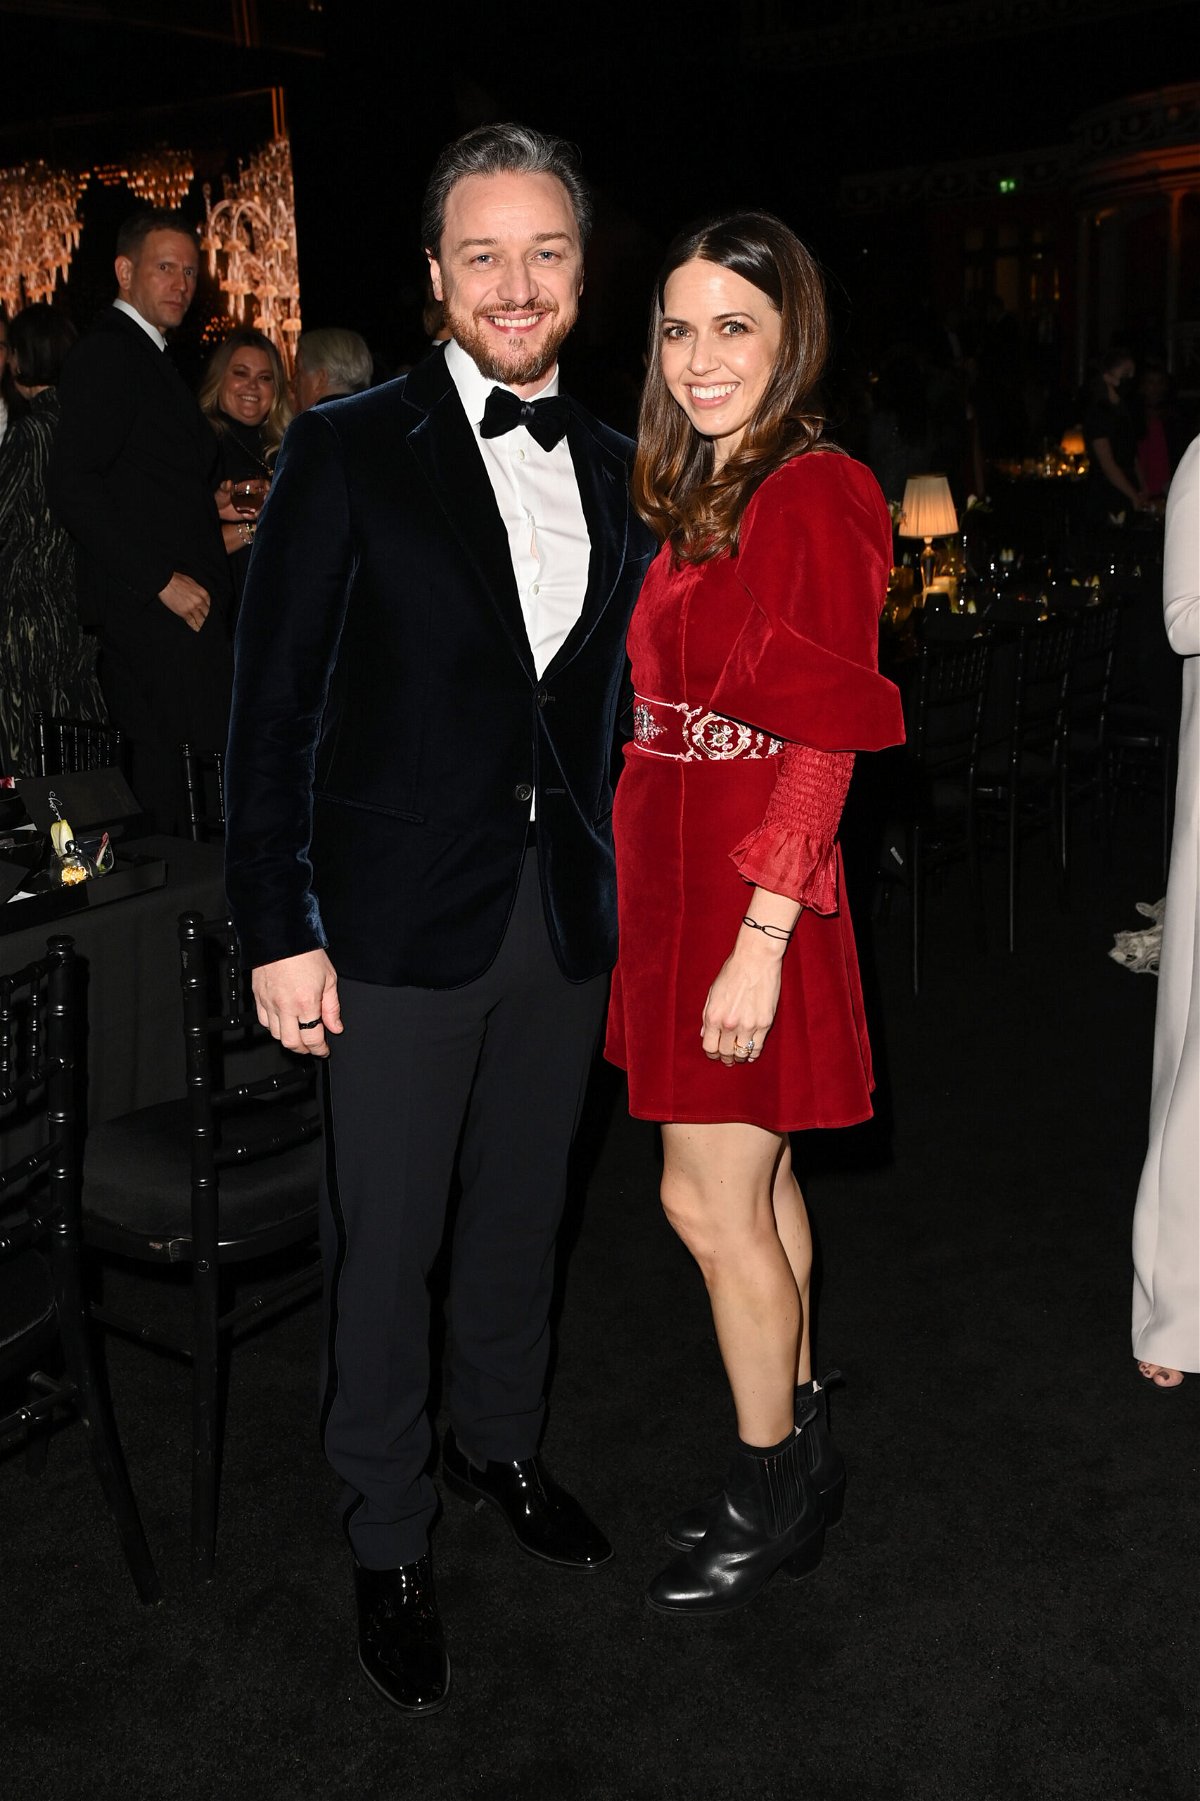 <i>Kate Green/BFC/Getty Images for BFC</i><br/>James McAvoy has quietly confirmed that he married Lisa Liberati.